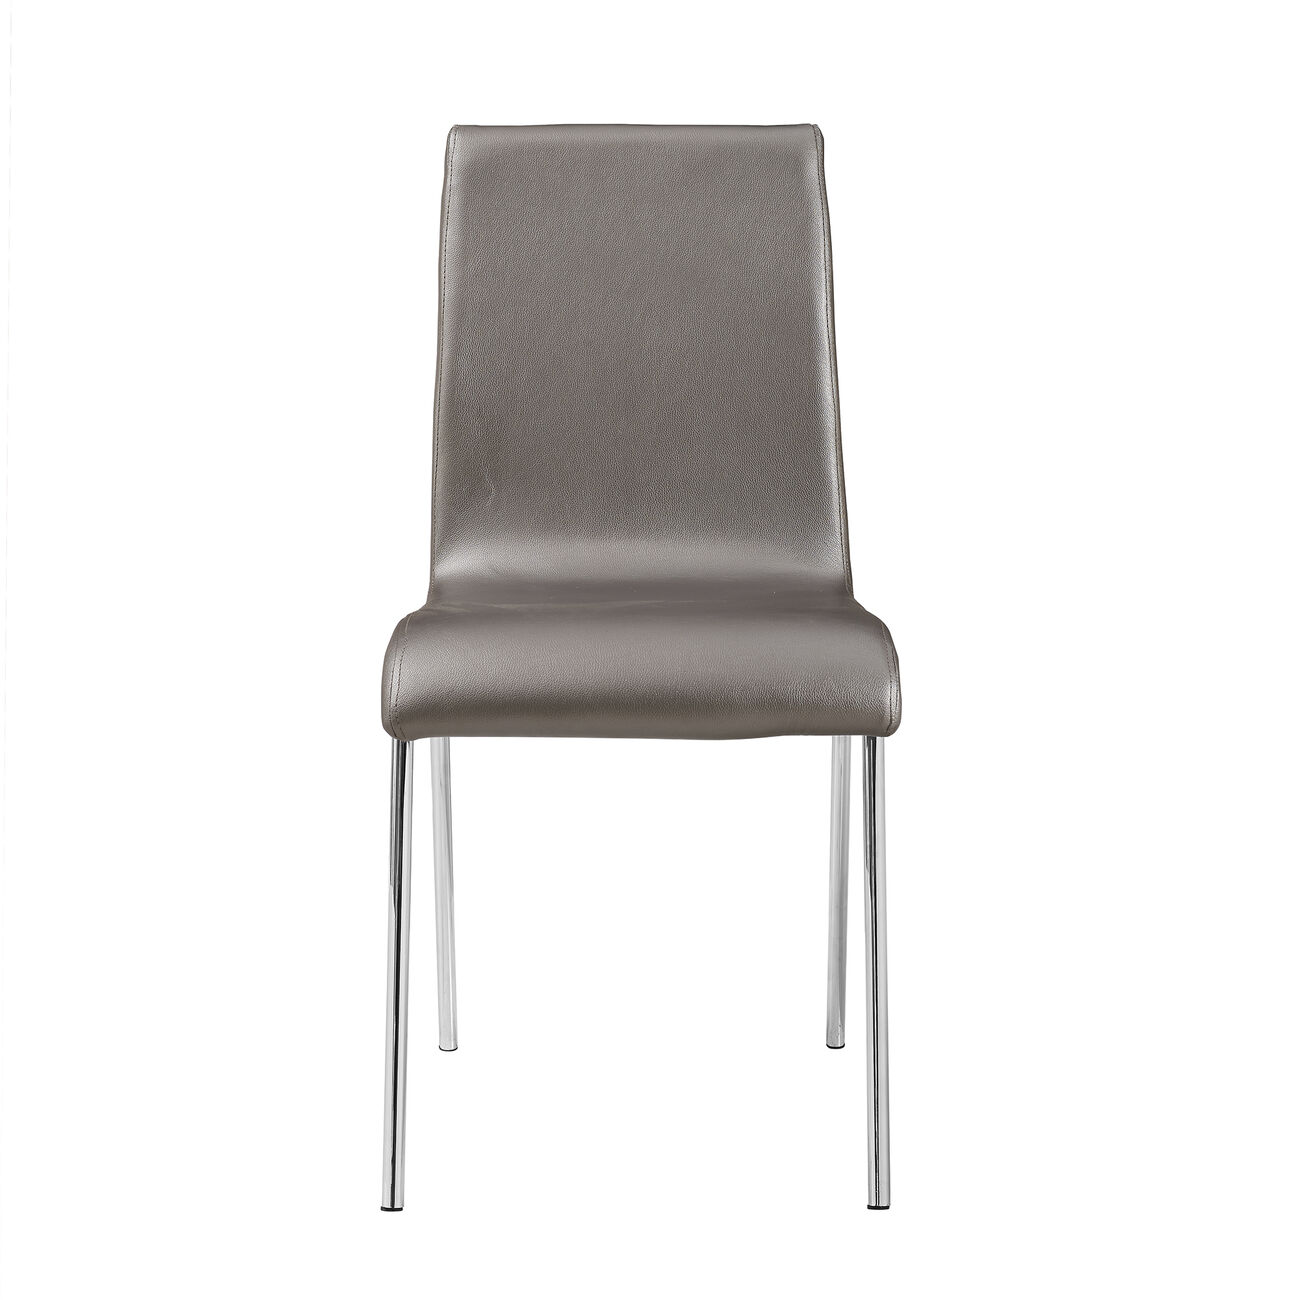 Metal Frame Dining Chair with Leatherette Seating,Set of 4,Brown and Silver